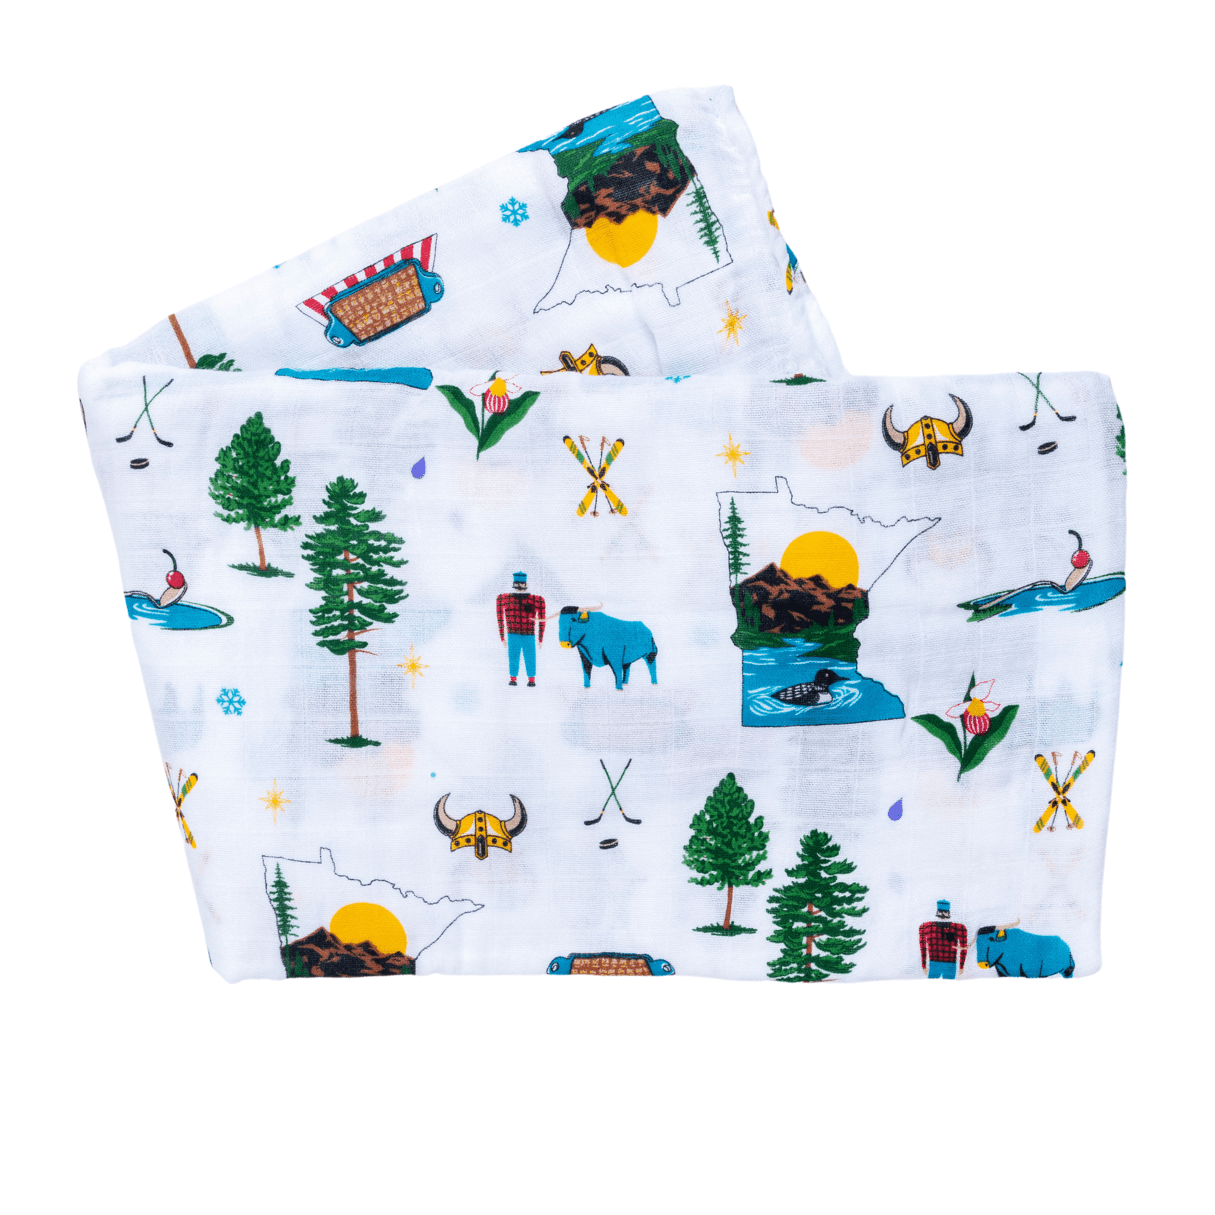 Minnesota-themed baby gift set with muslin swaddle blanket, burp cloth, and bib featuring state icons.